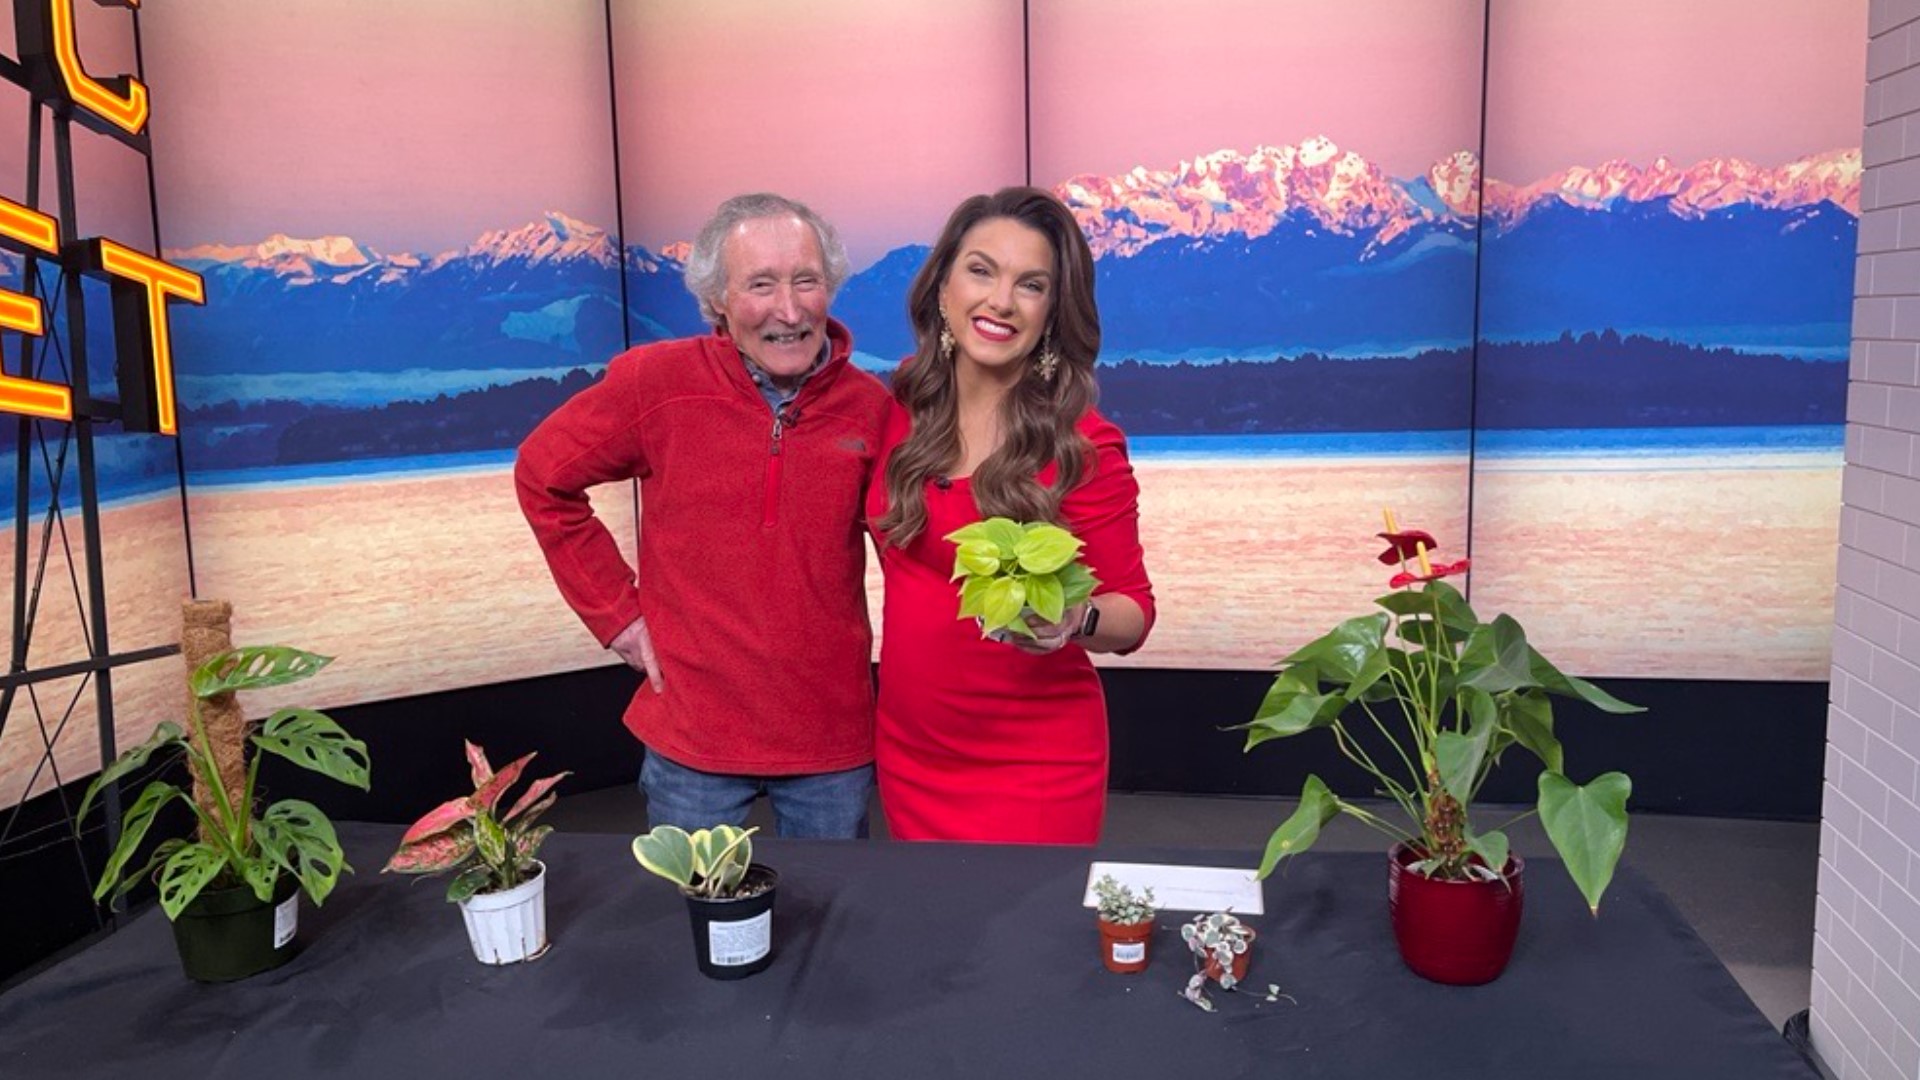 Heart shaped leaves and easy to grow, Ciscoe Morris shares the perfect Valentine plant to give.